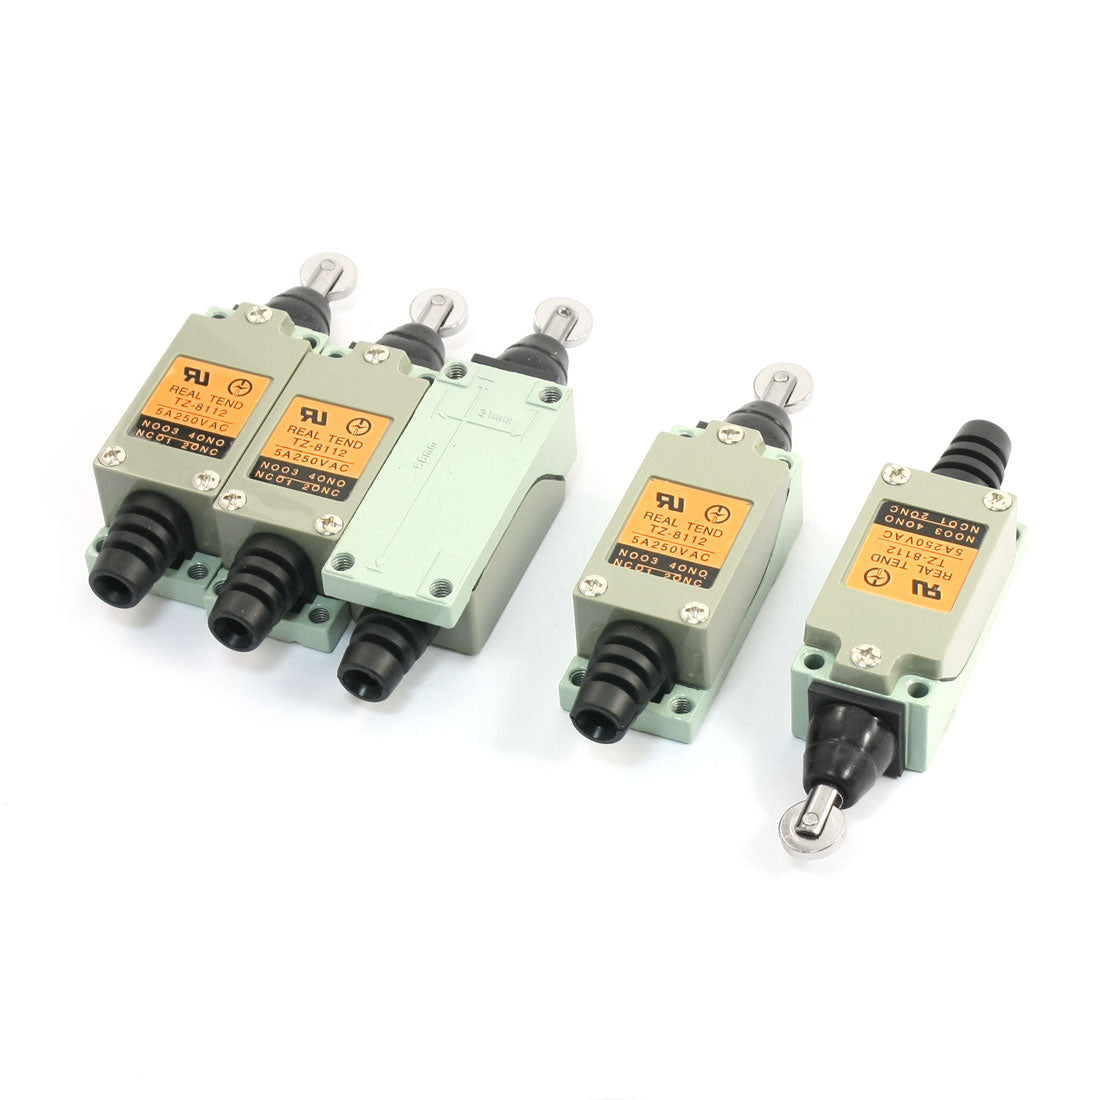 uxcell Uxcell 5pcs TZ-8112 Cross Roller Plunger Actuator Enclosed Limit Switch AC 250V 5A